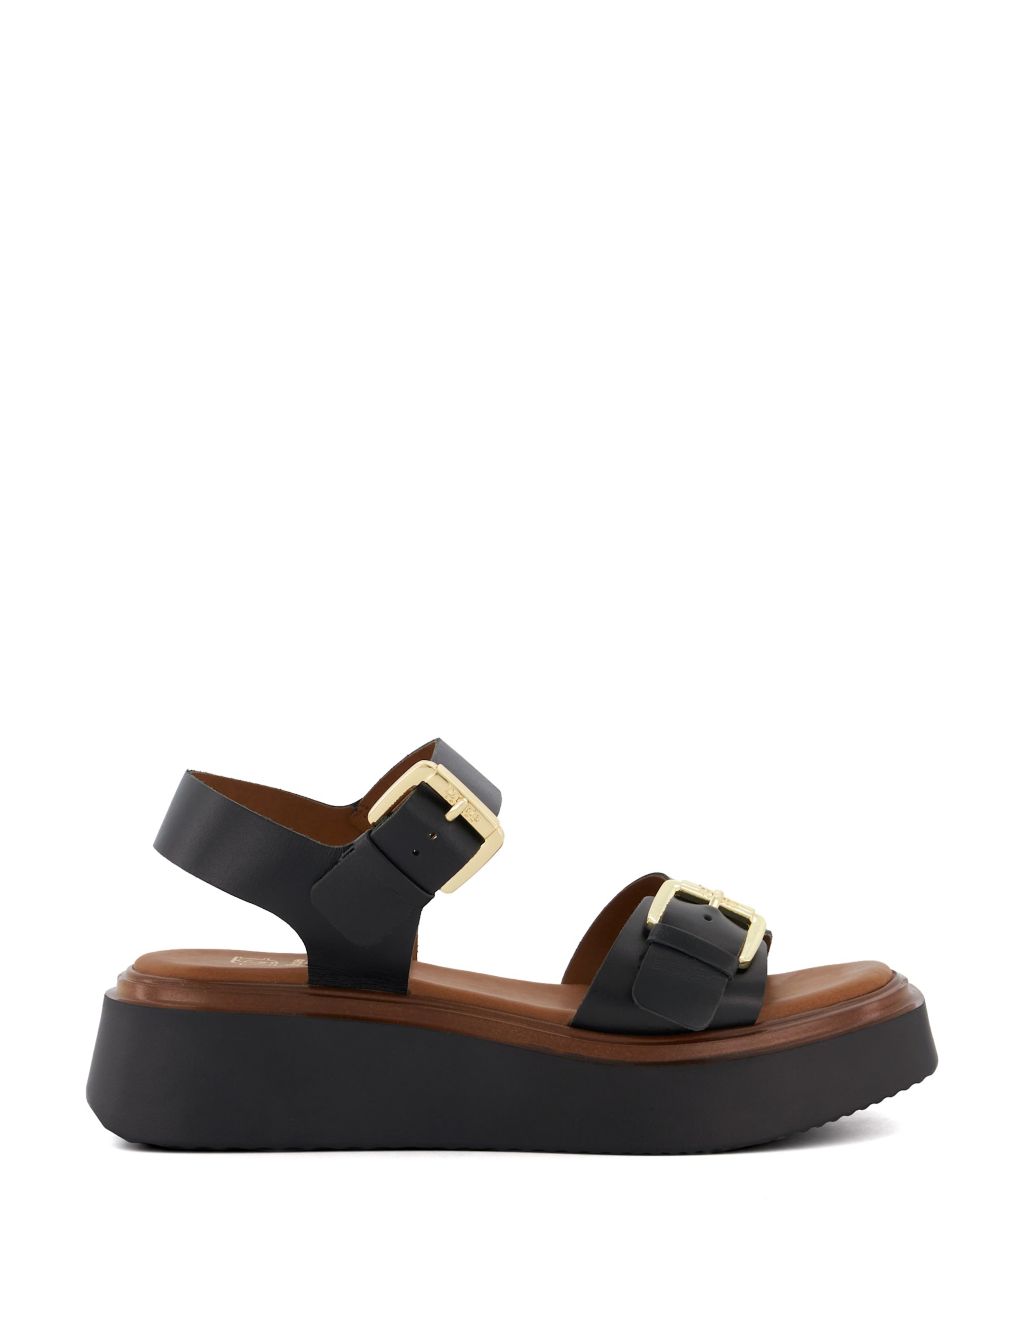 Buy Page 2 - Women's Black Sandals from the M&S UK Online Shop